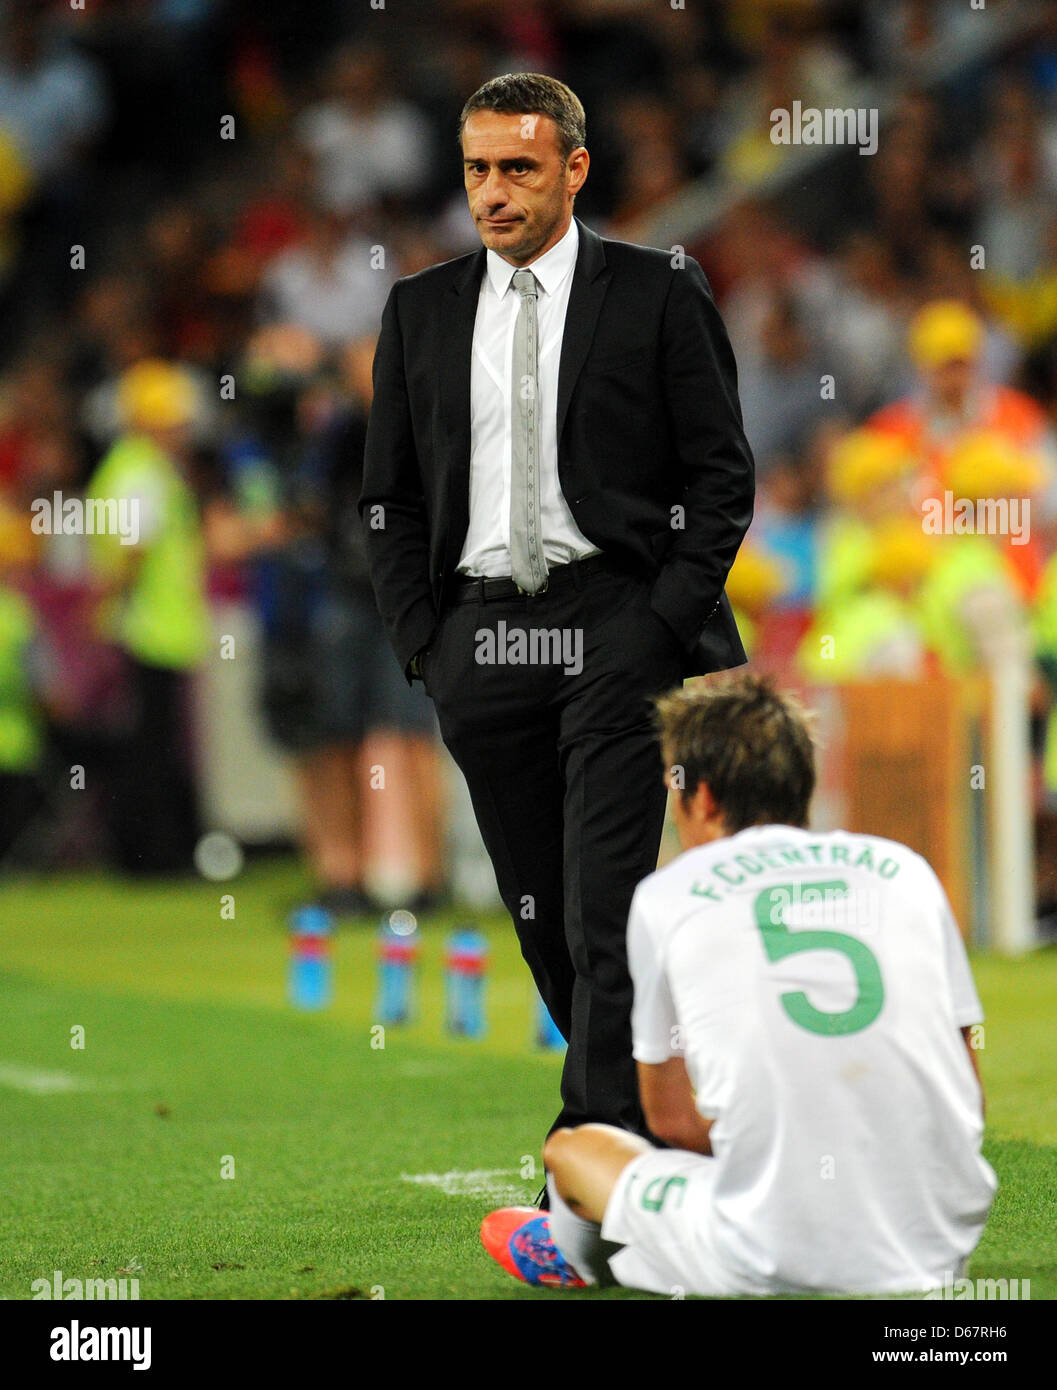 Portugals coach paulo bento fabio High Resolution Stock Photography and  Images - Alamy